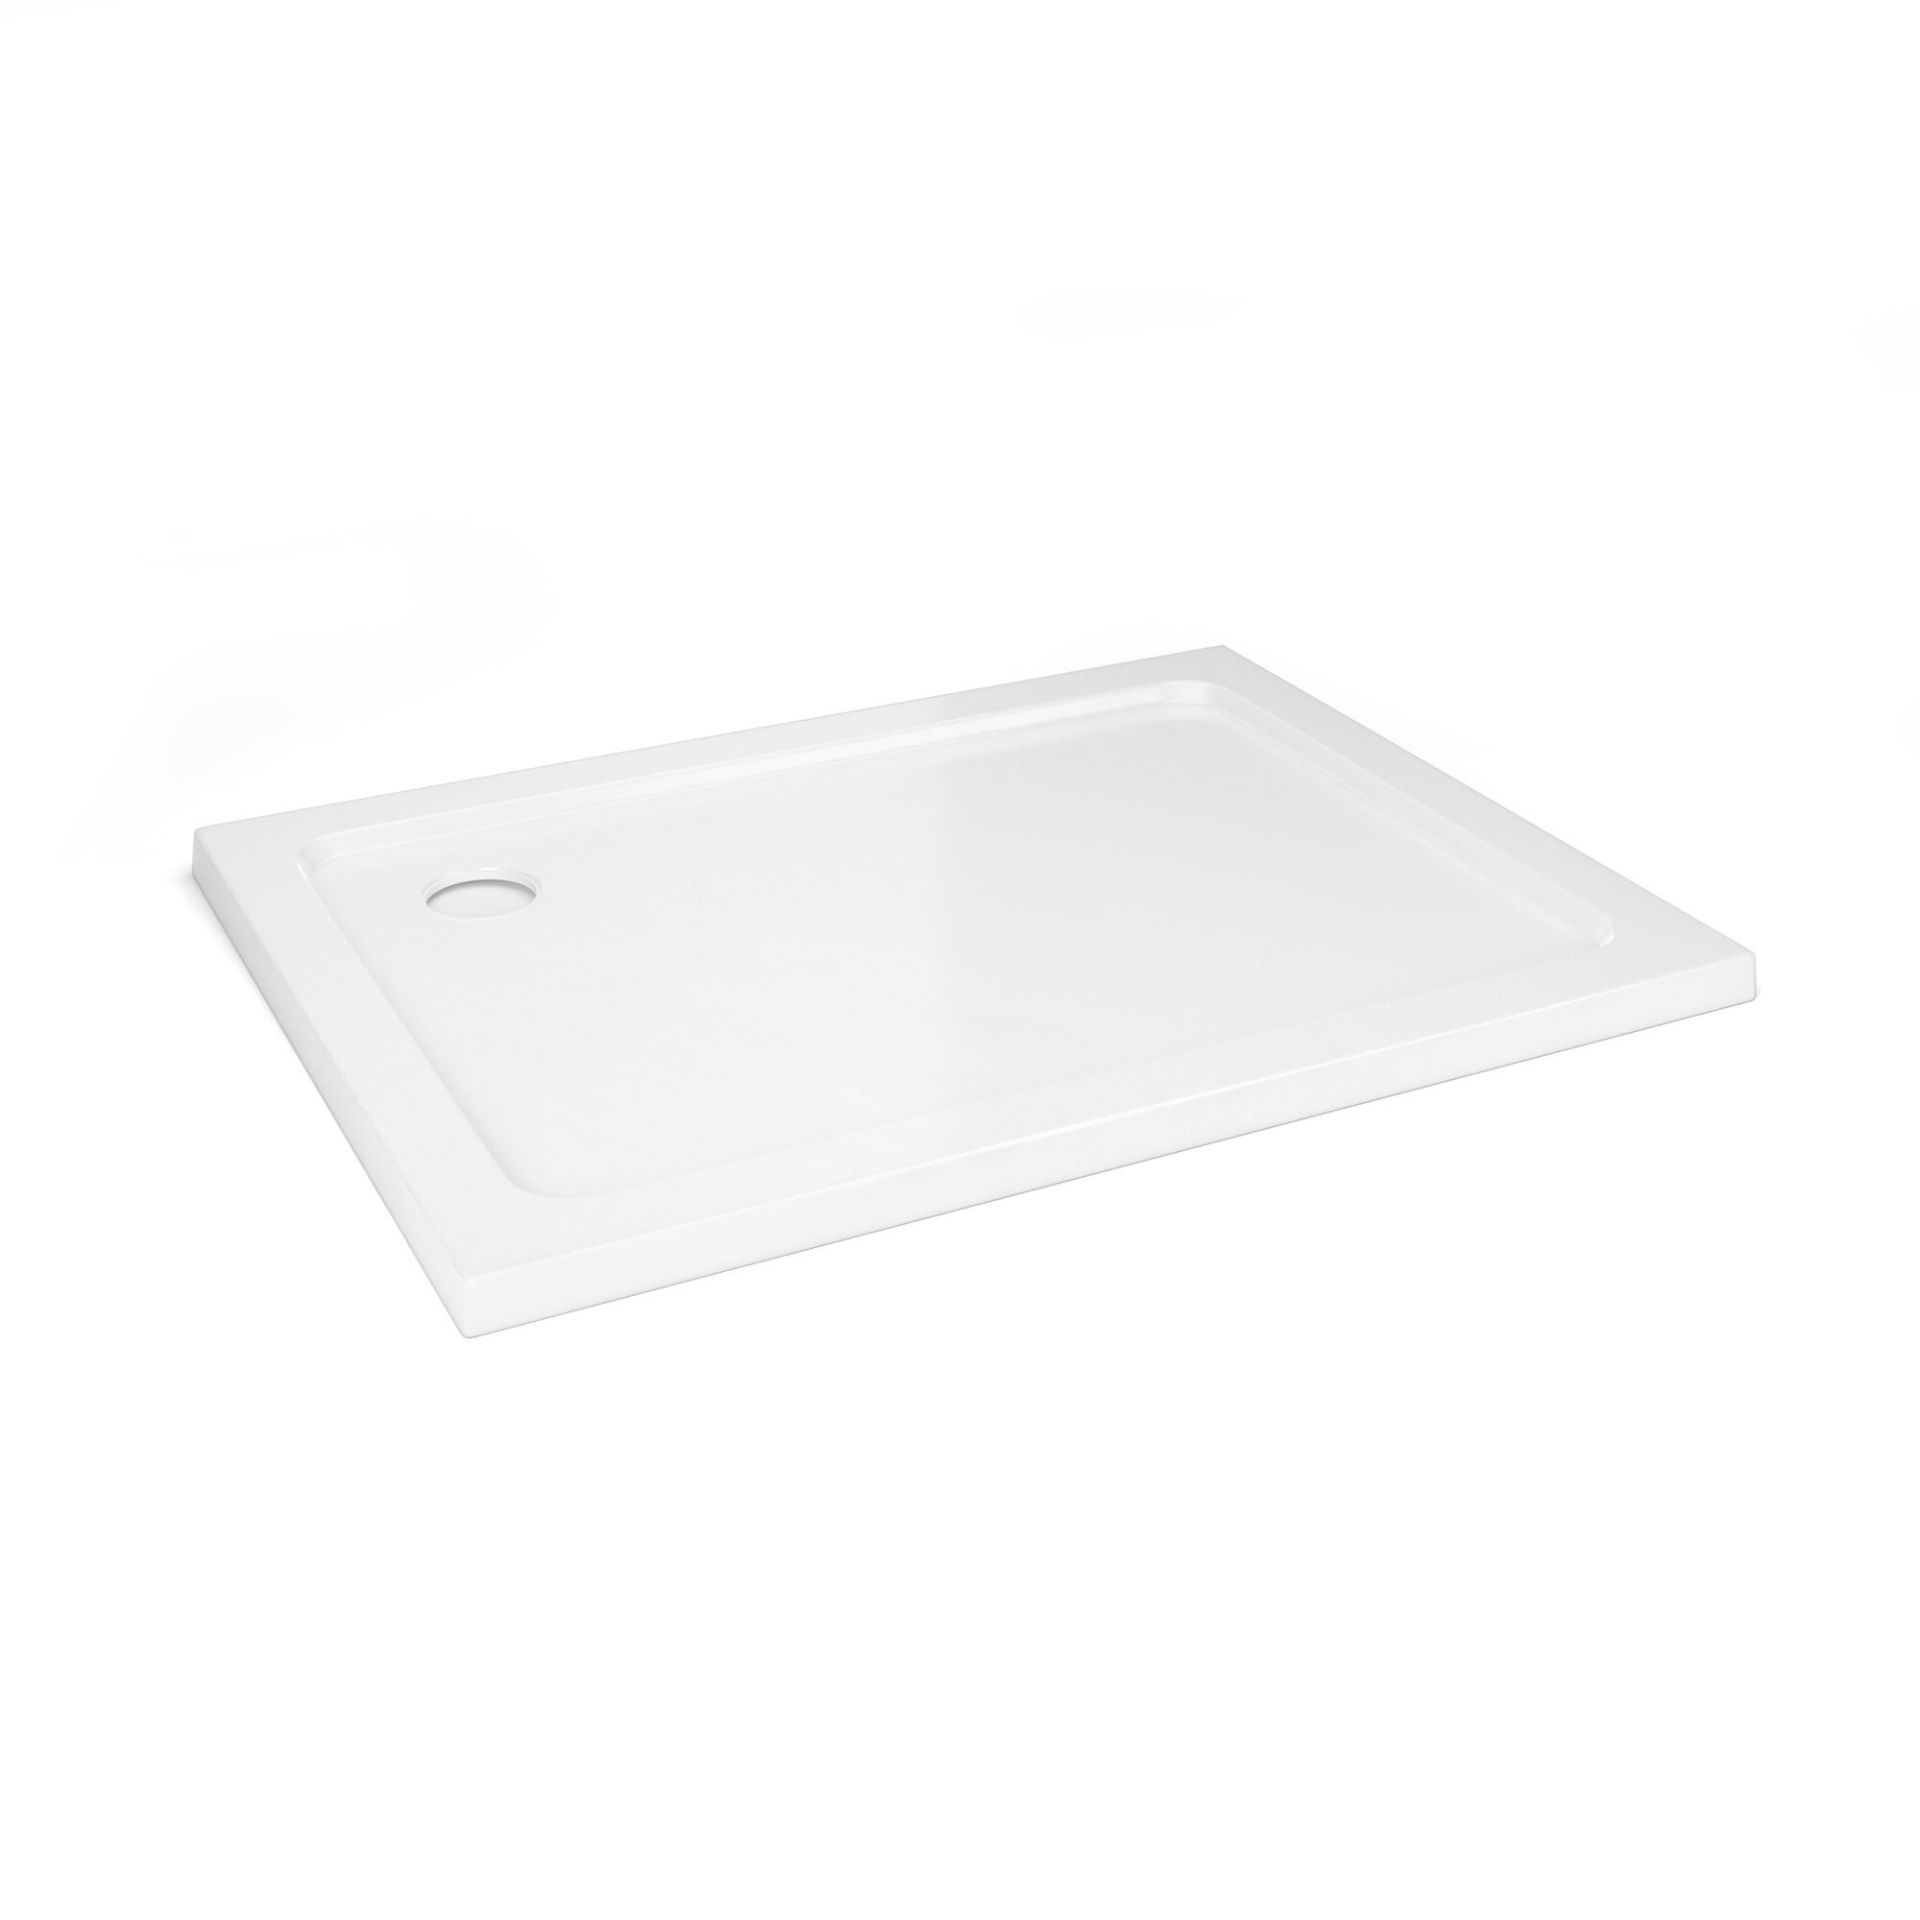 (RR42) 1000x760mm Rectangular Stone Shower Tray - Ultra Slim. RRP £299.99. Low profile ultra s...(( - Image 2 of 2